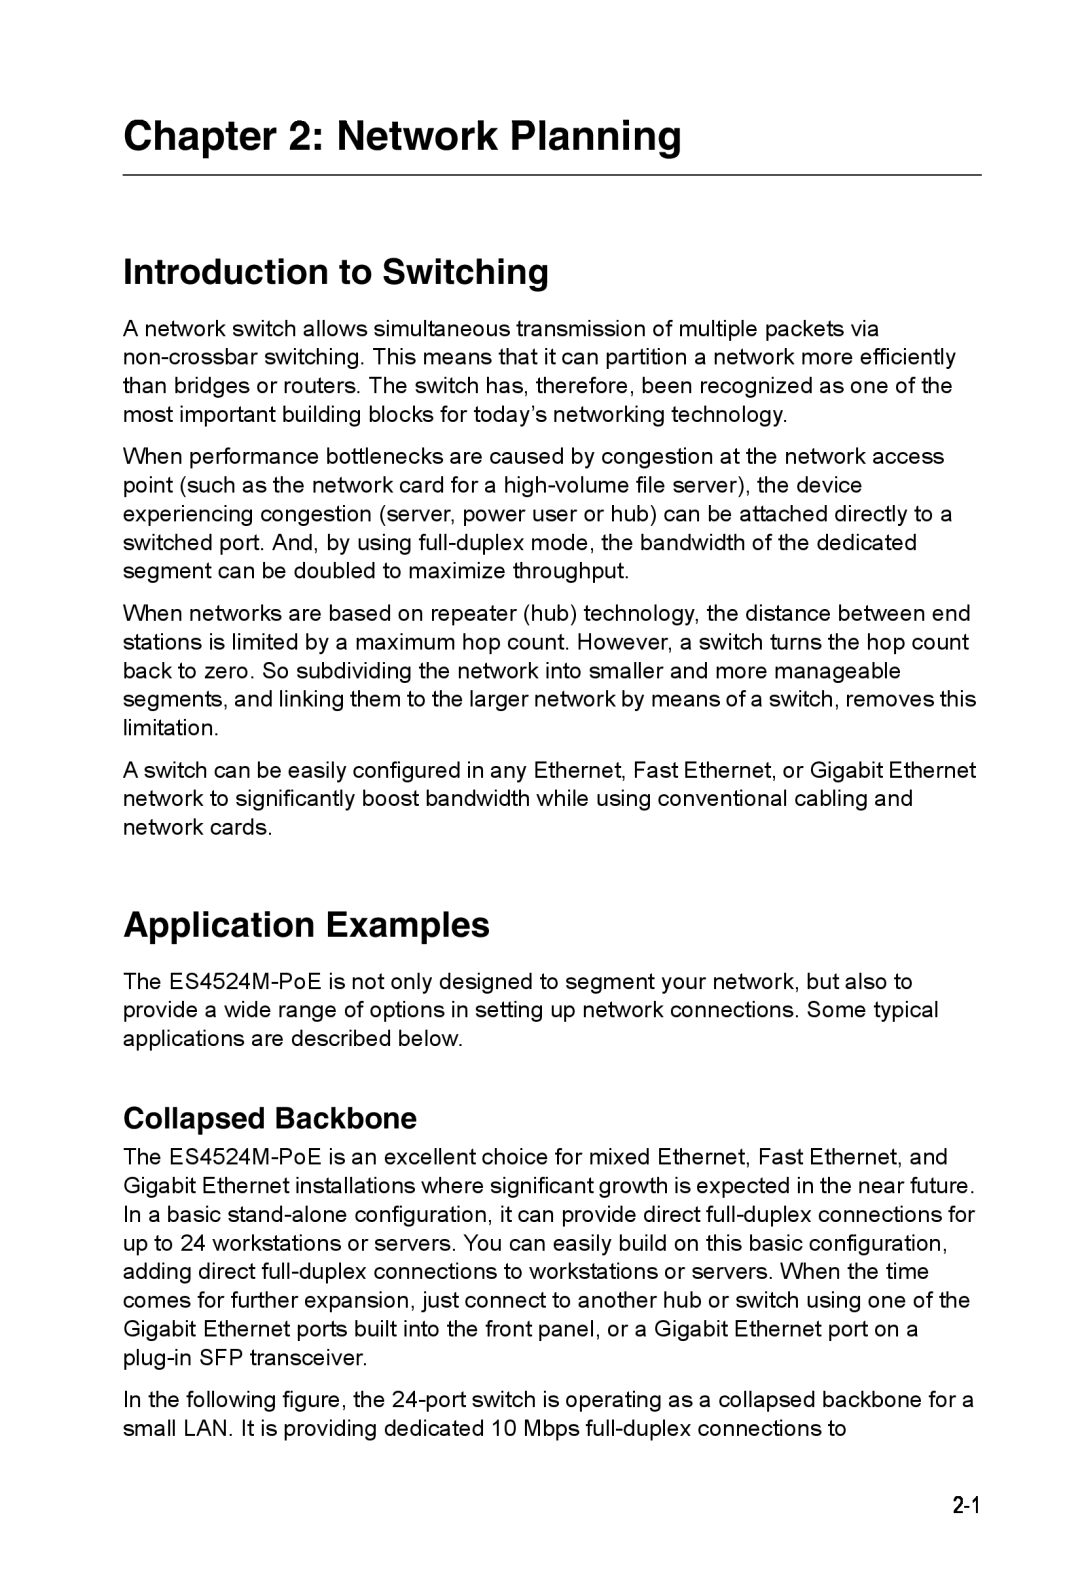 Accton Technology ES4524M-POE manual Network Planning, Introduction to Switching, Application Examples, Collapsed Backbone 